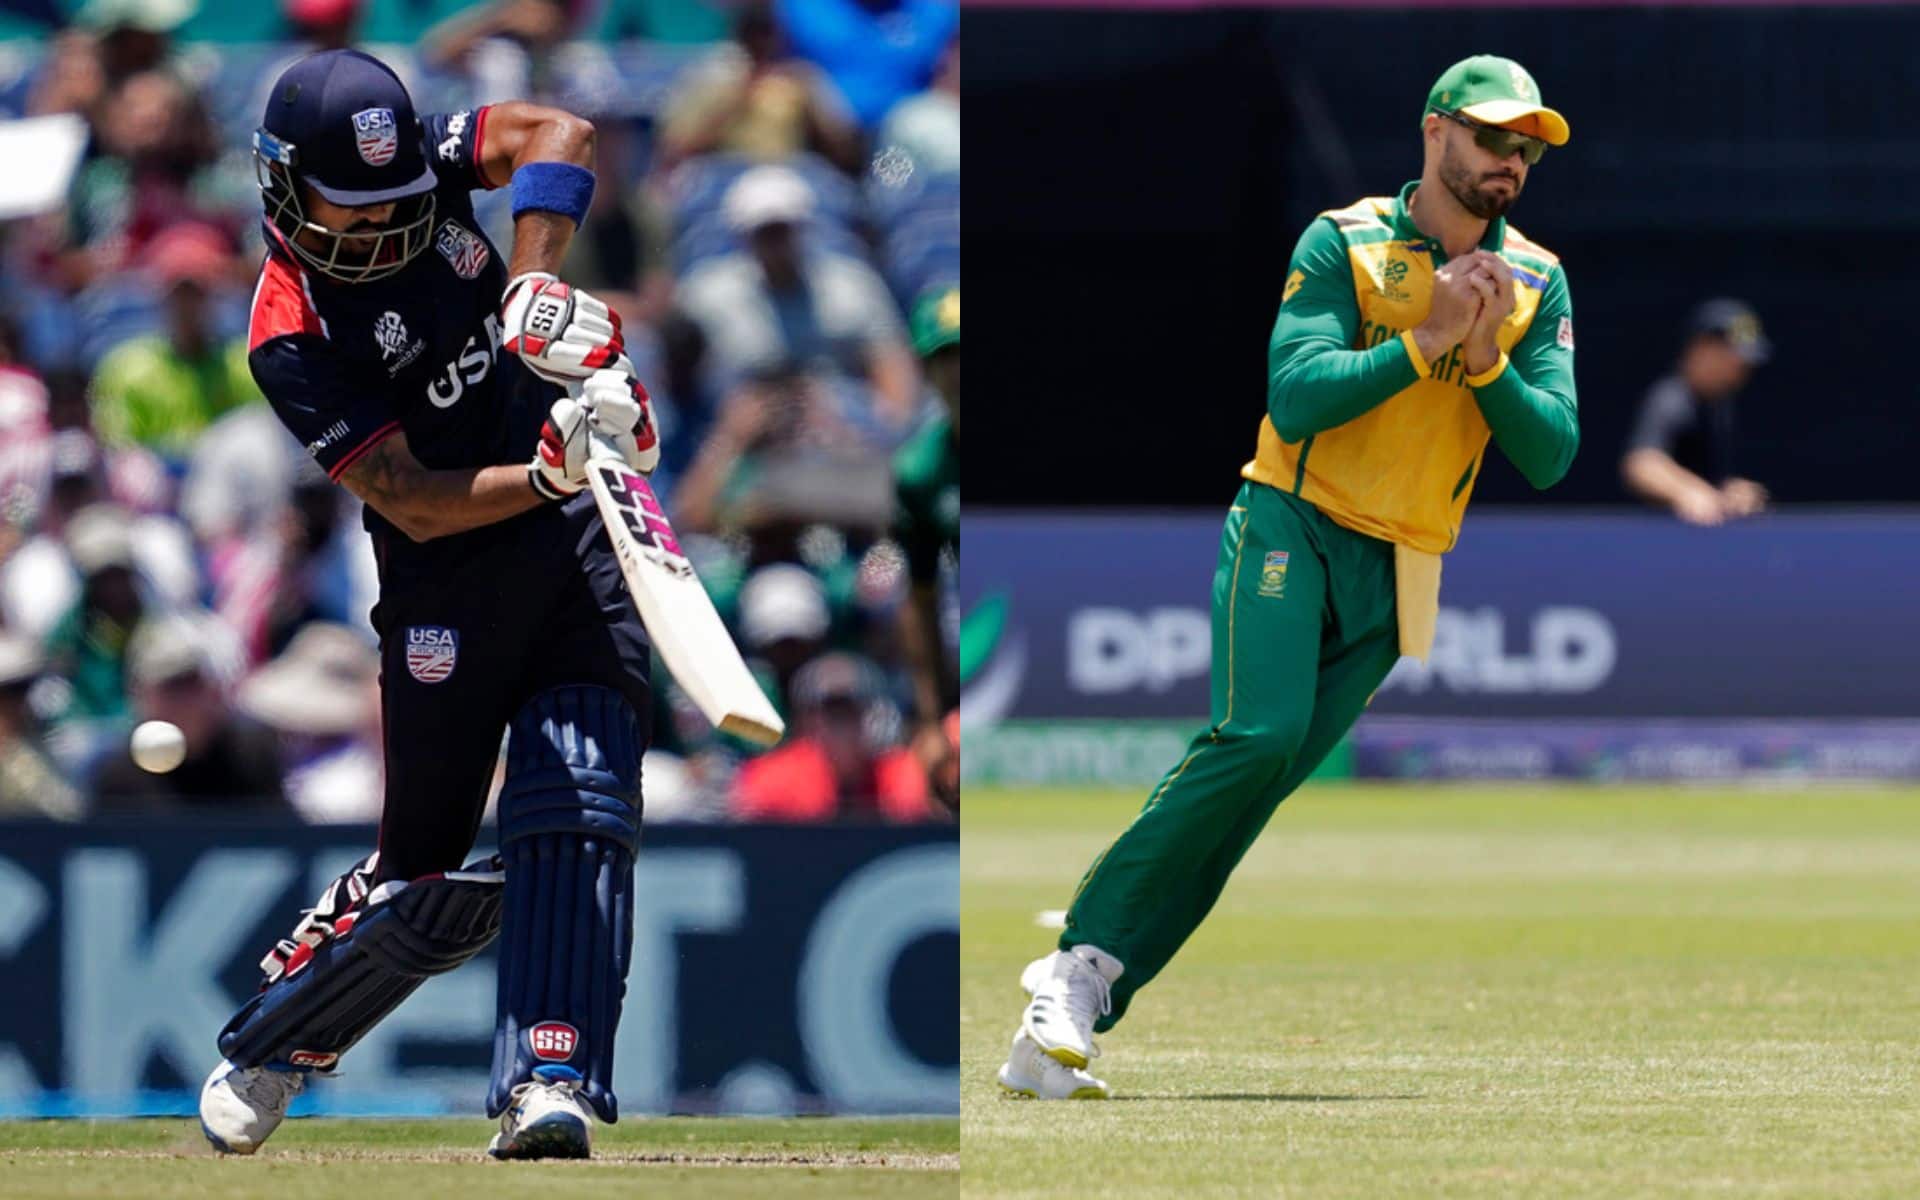 Monank Patel and Aiden Markran will be leading their sides in the match [AP Photos]